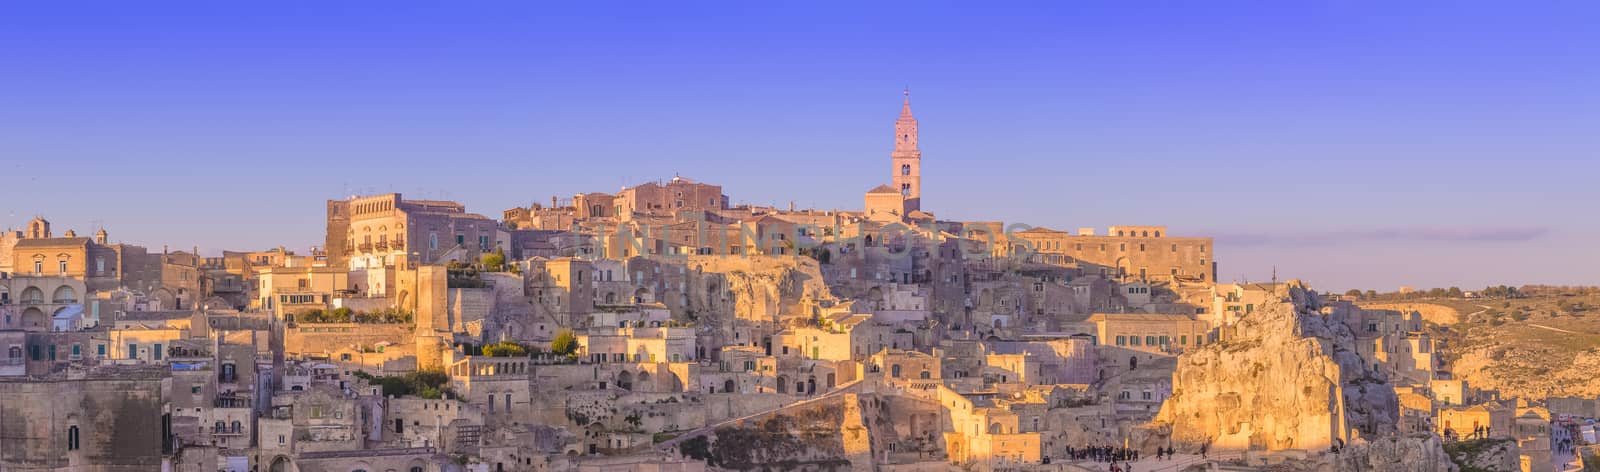 panoramic view of typical stones and church of Matera and the Madonna de Idris under begin sunset sky by donfiore